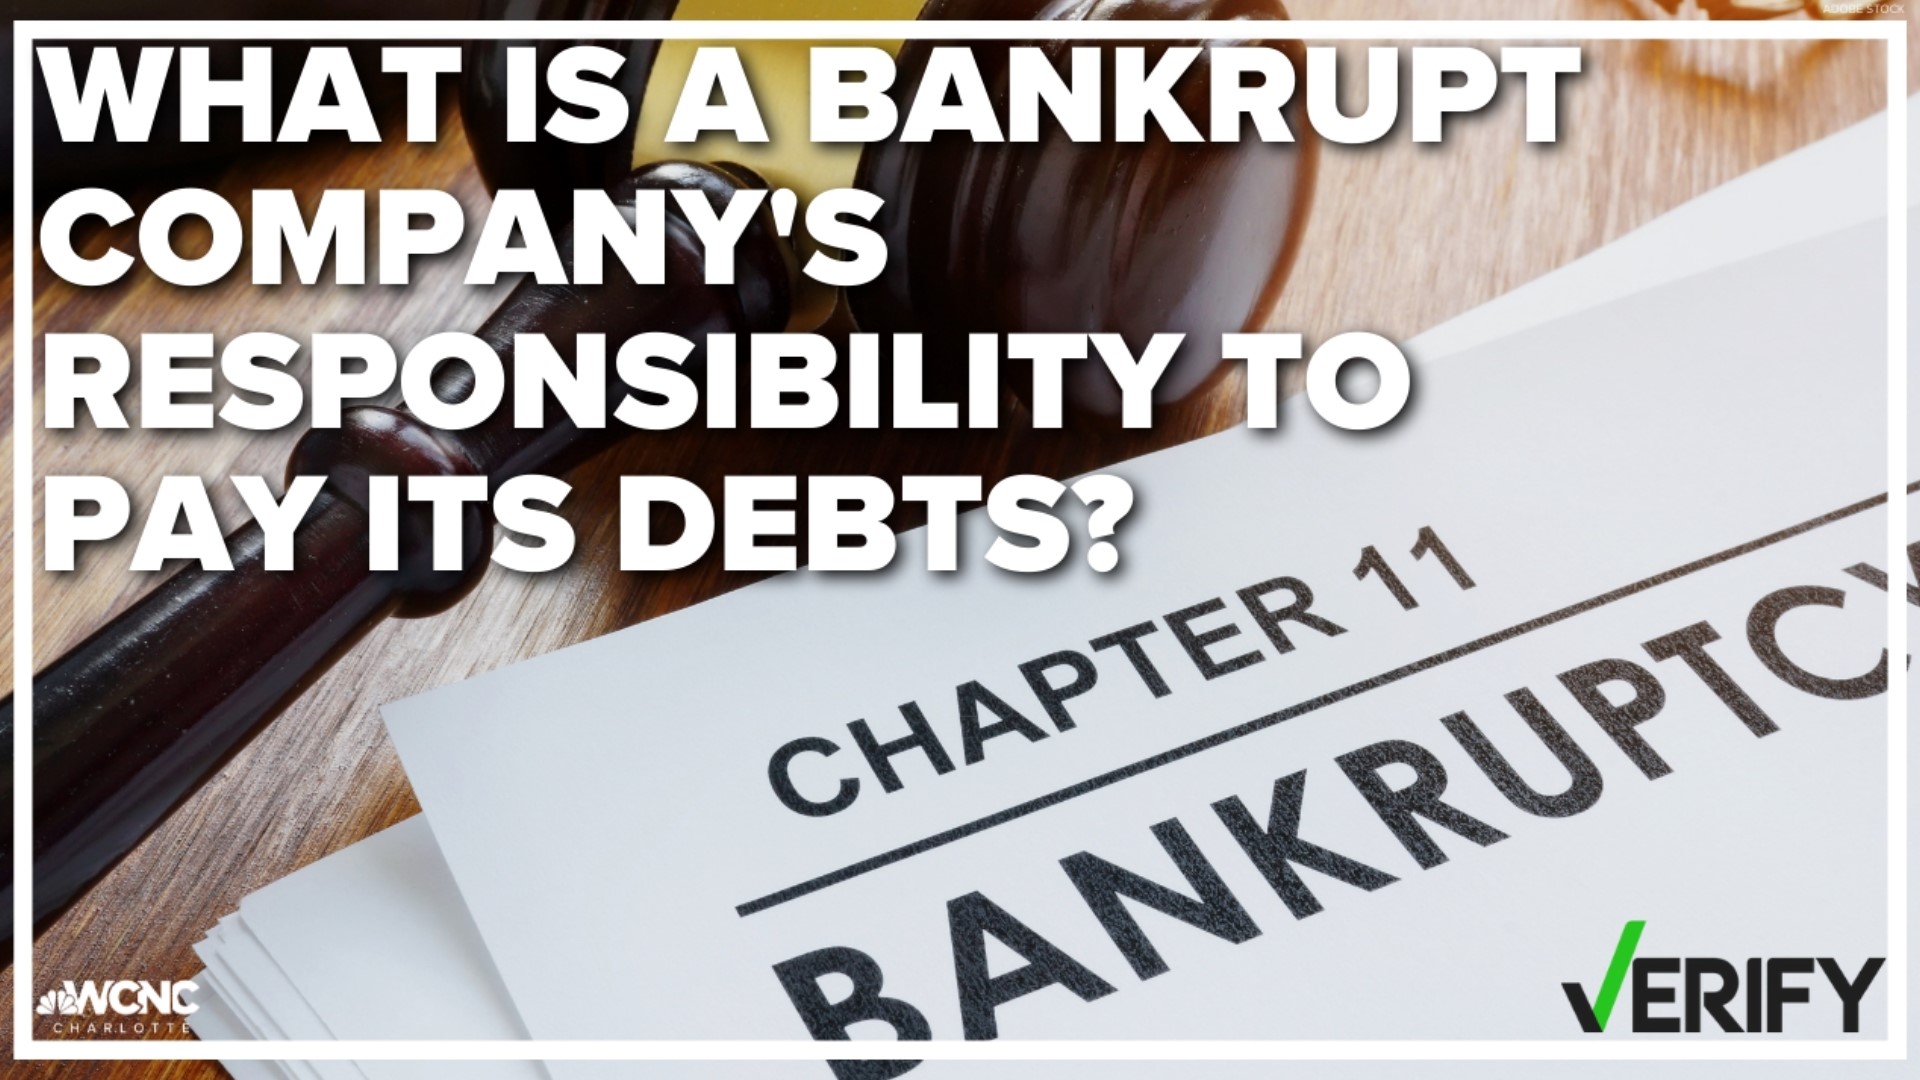 The law outlines a process to follow once a company files for Chapter 11 bankruptcy.